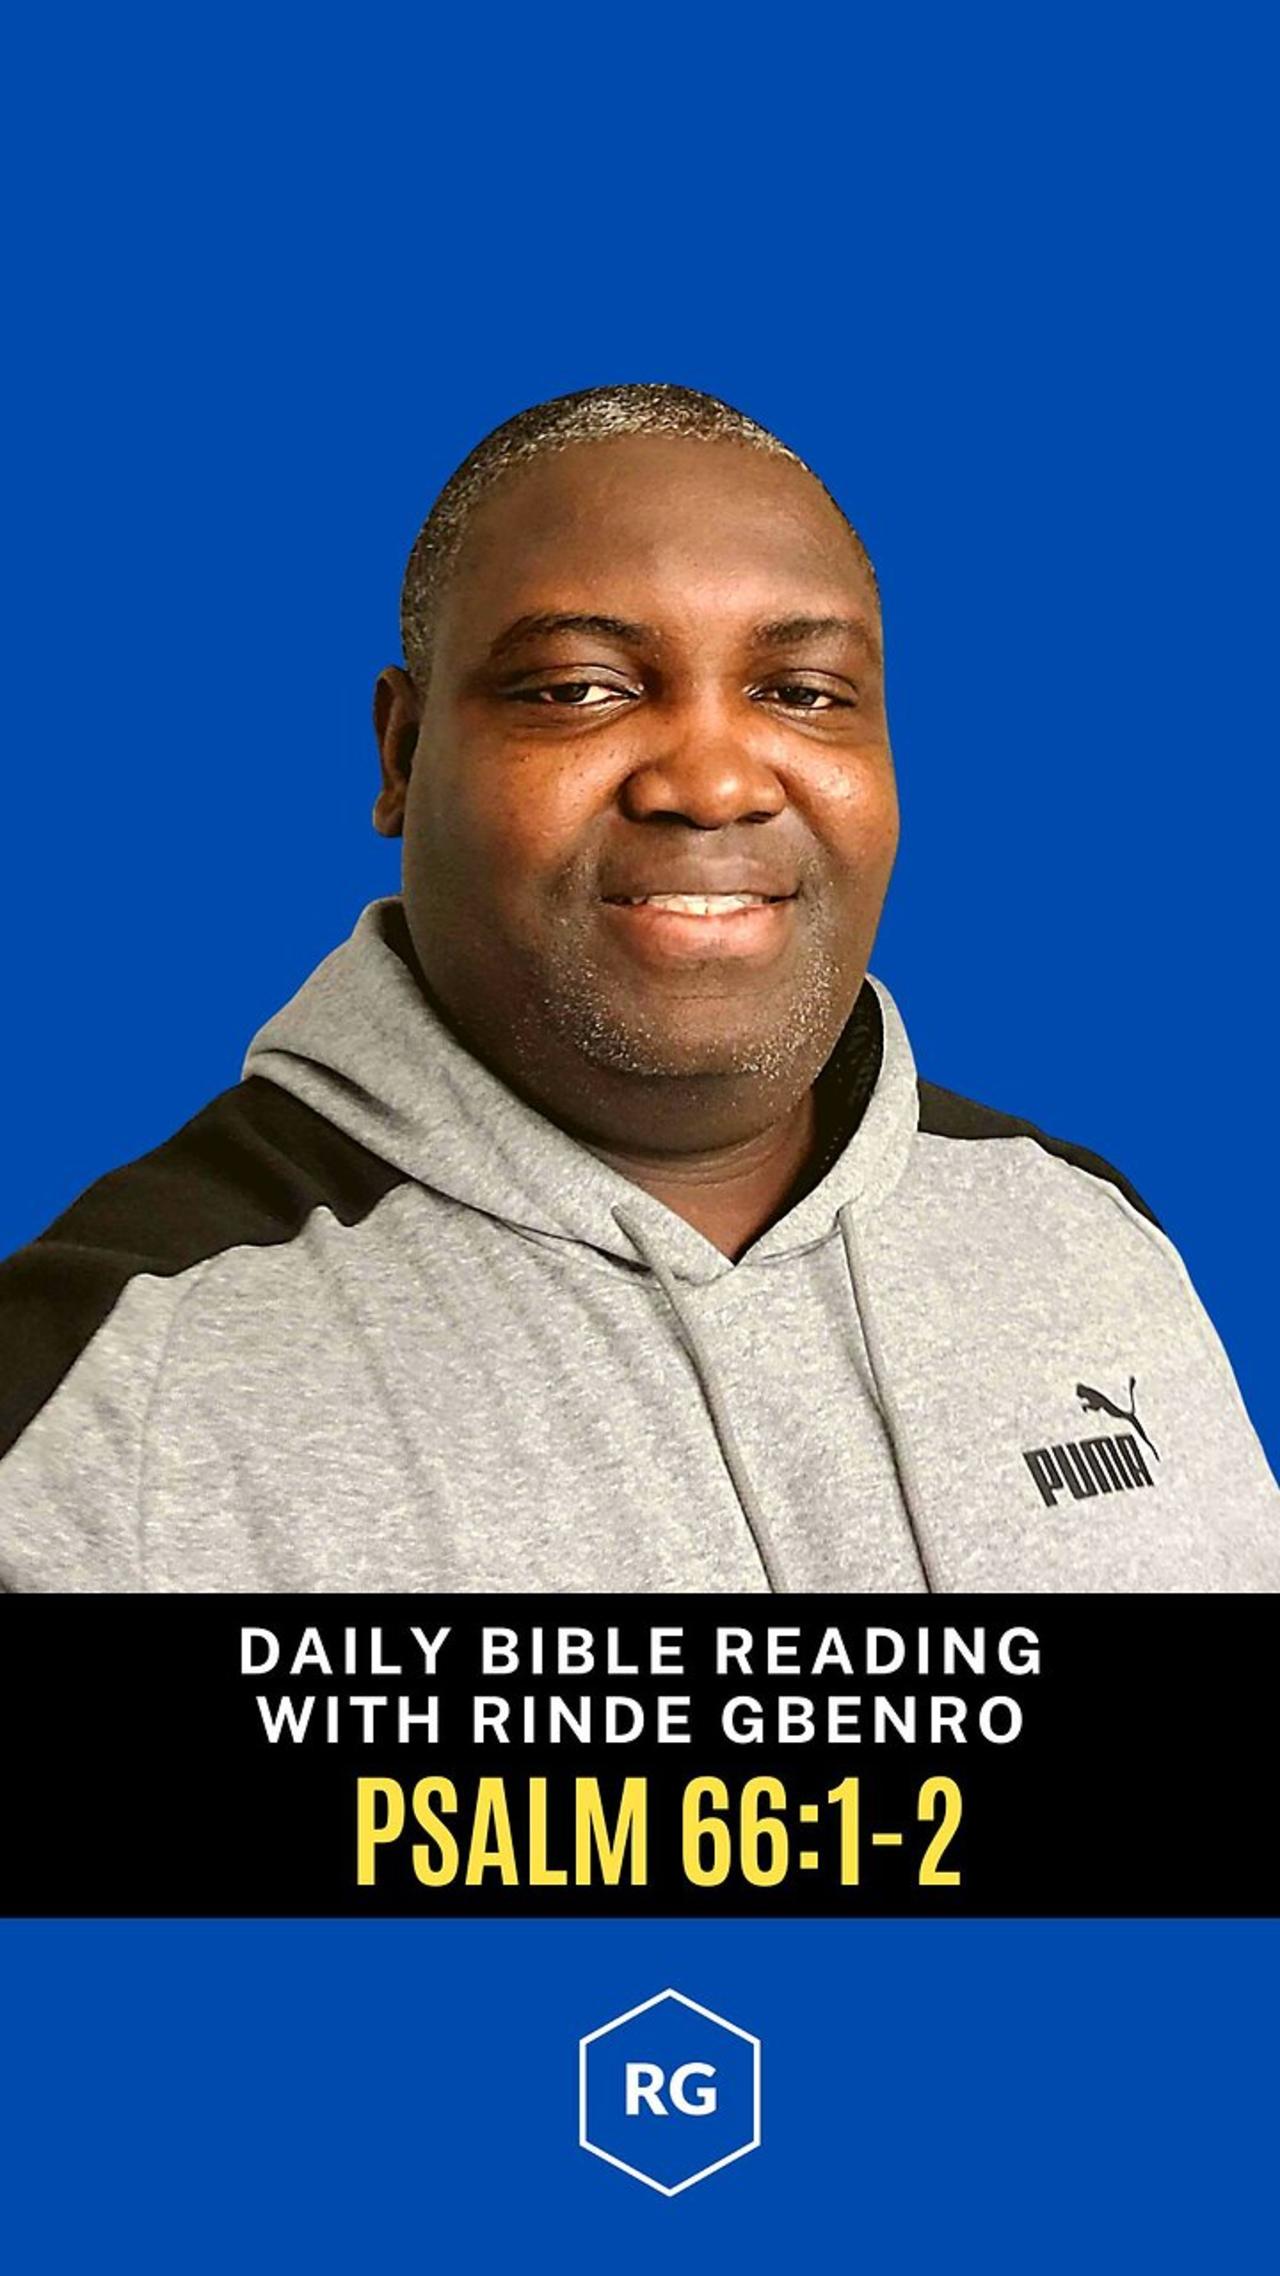 Psalm 66:1-2 #Shorts | Daily Bible Reading | Rinde Gbenro